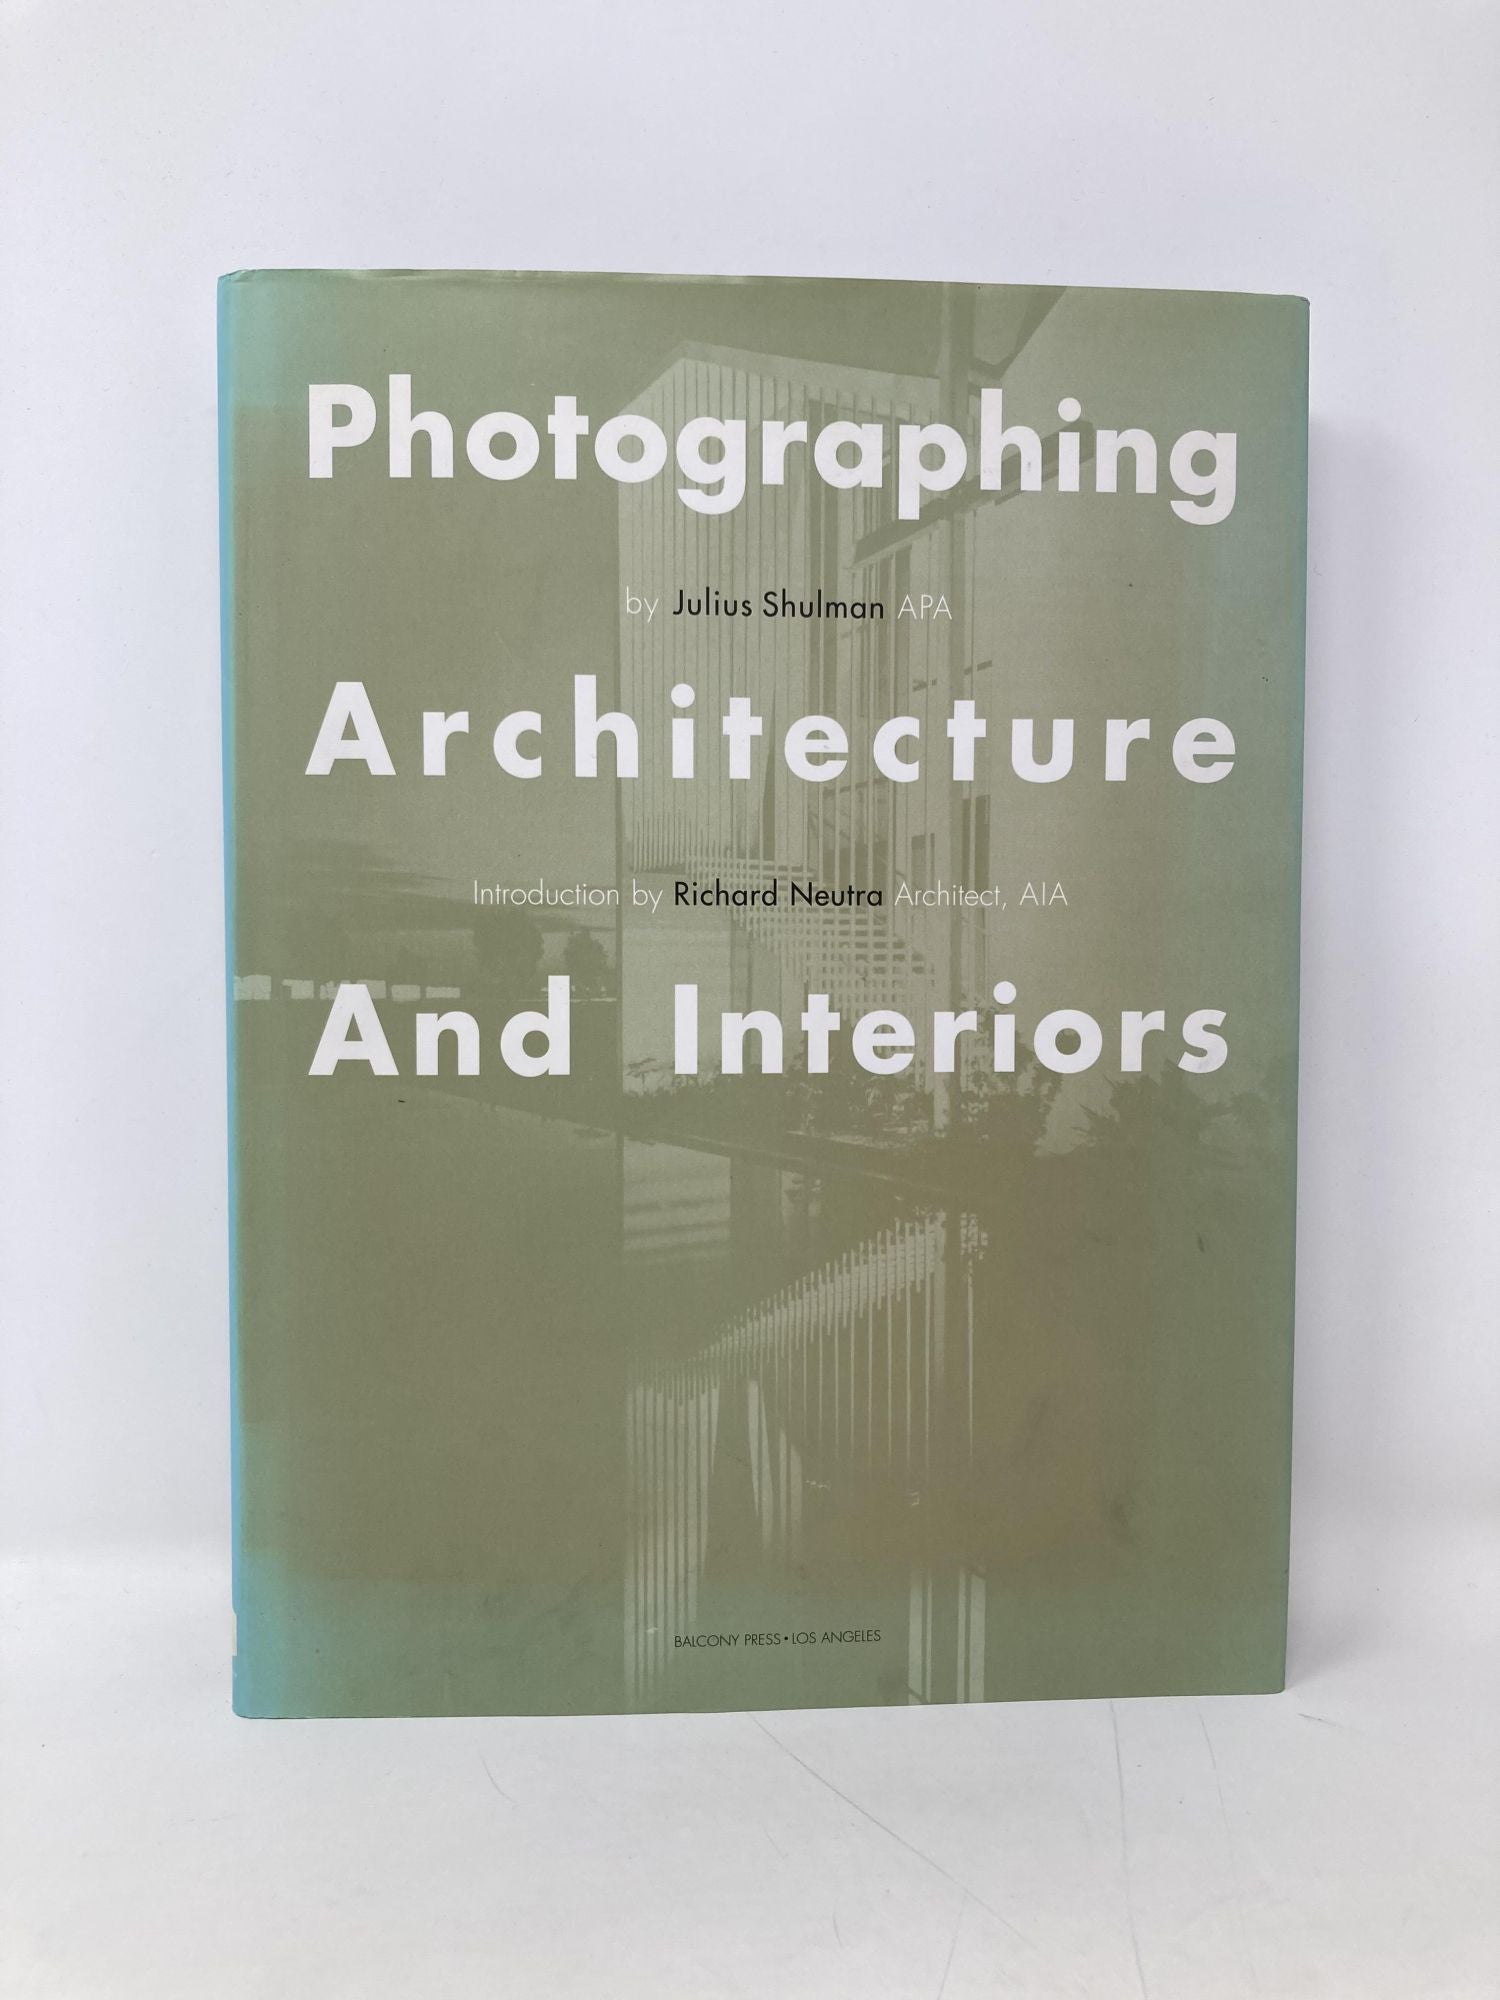 Photographing Architecture and Interiors by Julius Shulman on Sag Harbor  Books